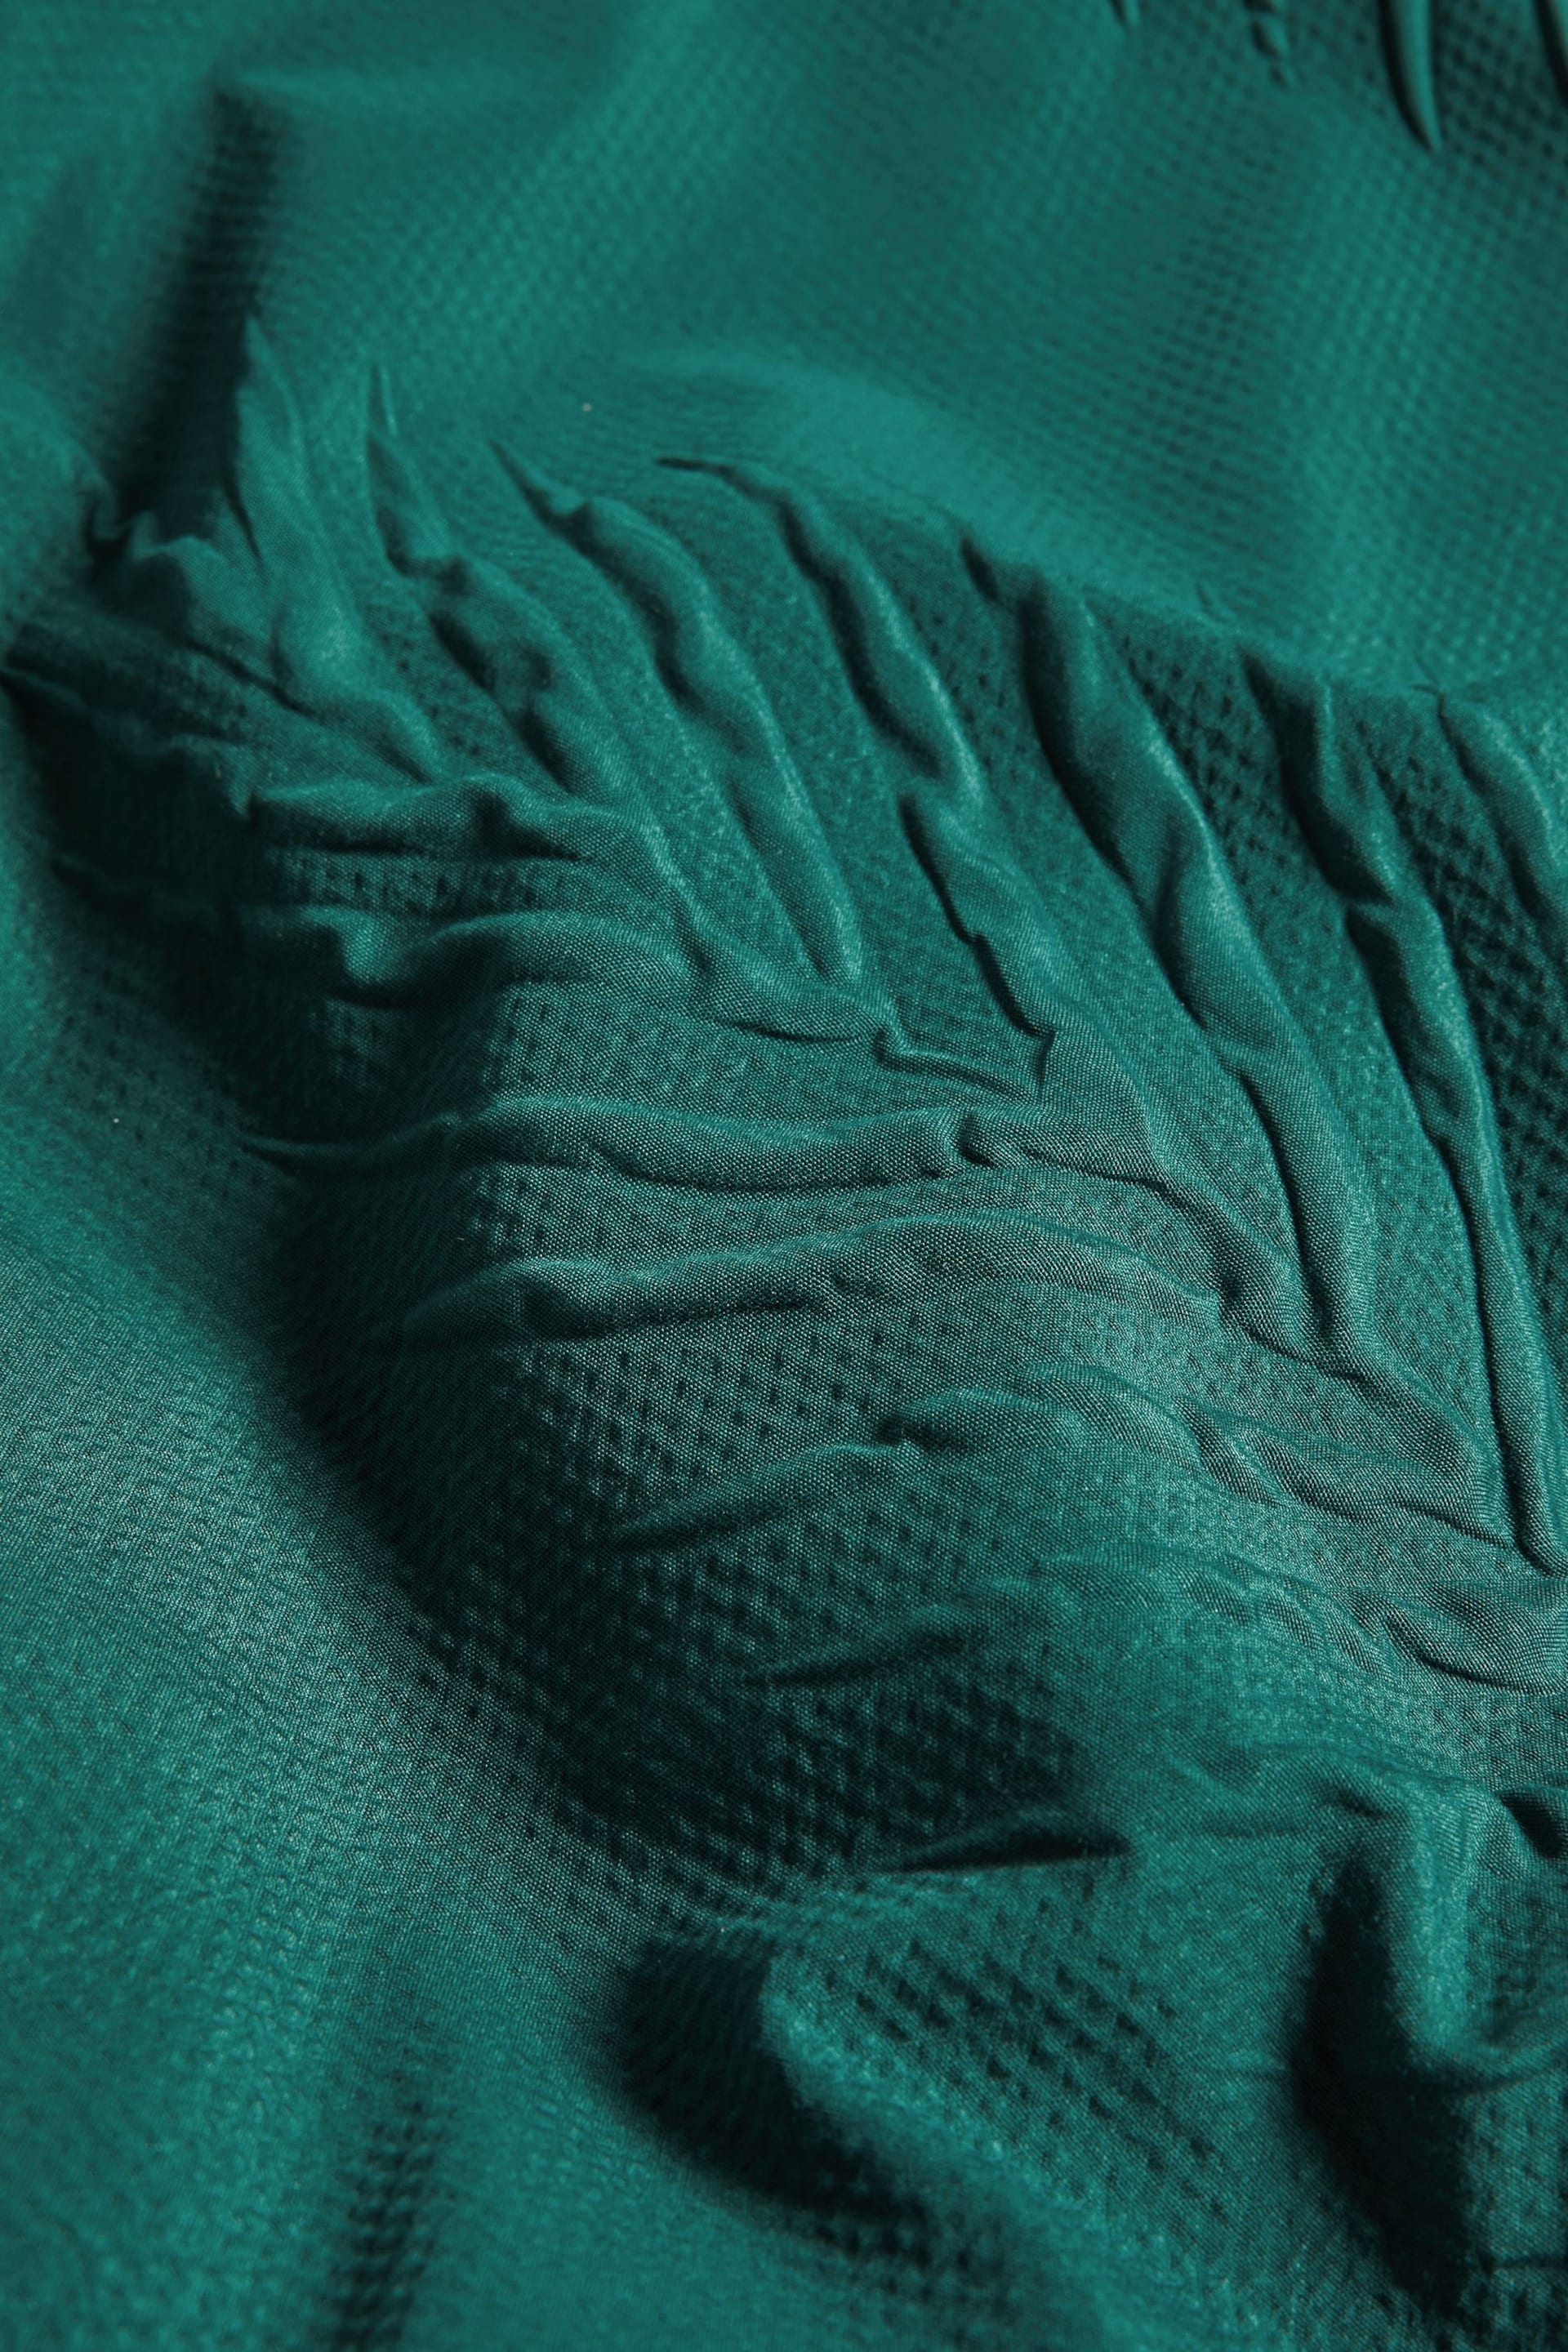 Green Embossed Leaf Duvet Cover and Pillowcase Set - Image 4 of 5